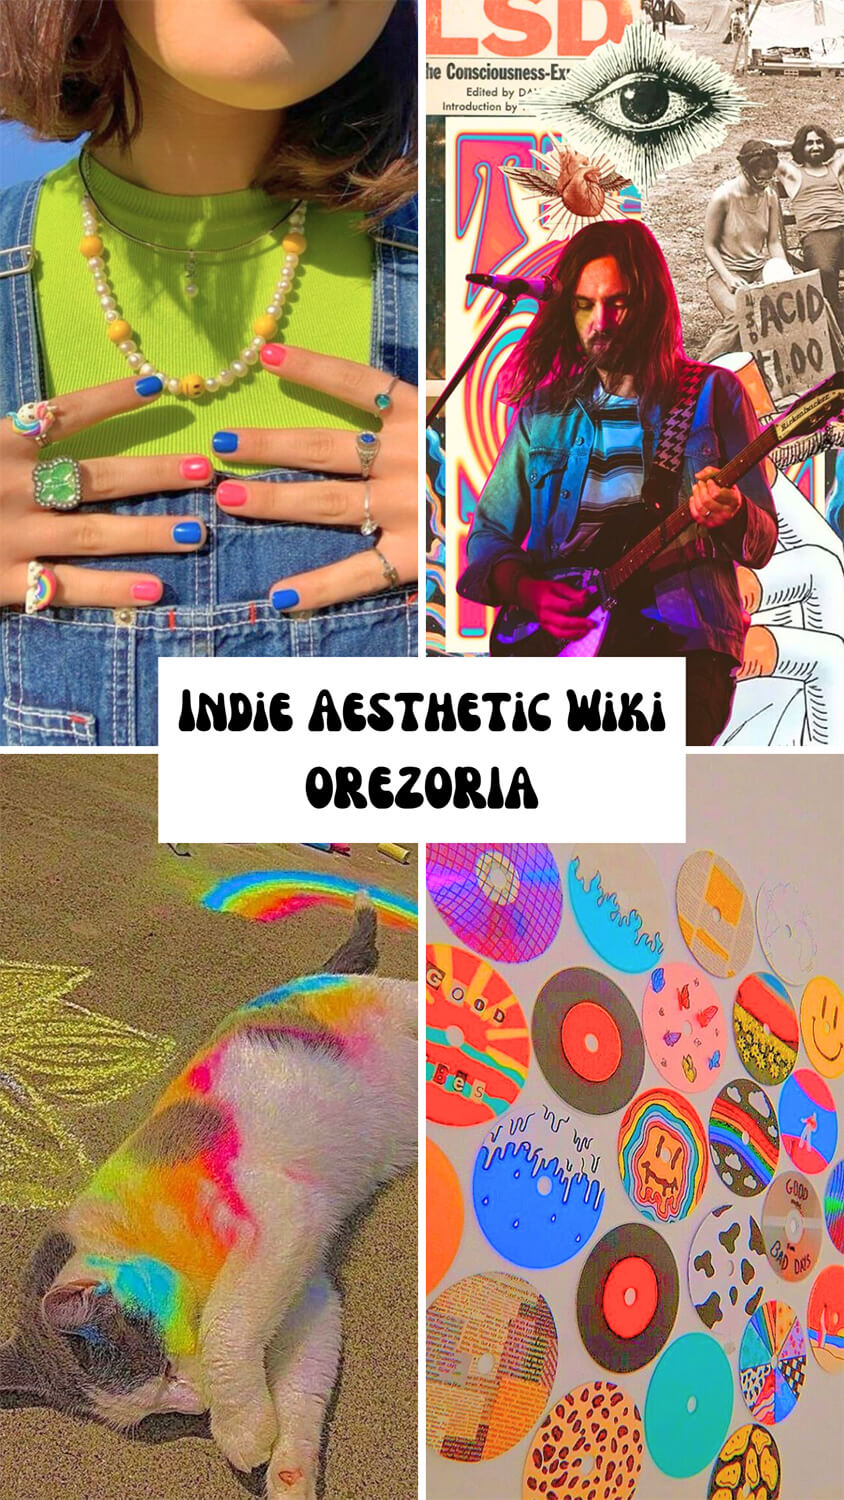 What is the Indie Aesthetic?, Aesthetics Wiki